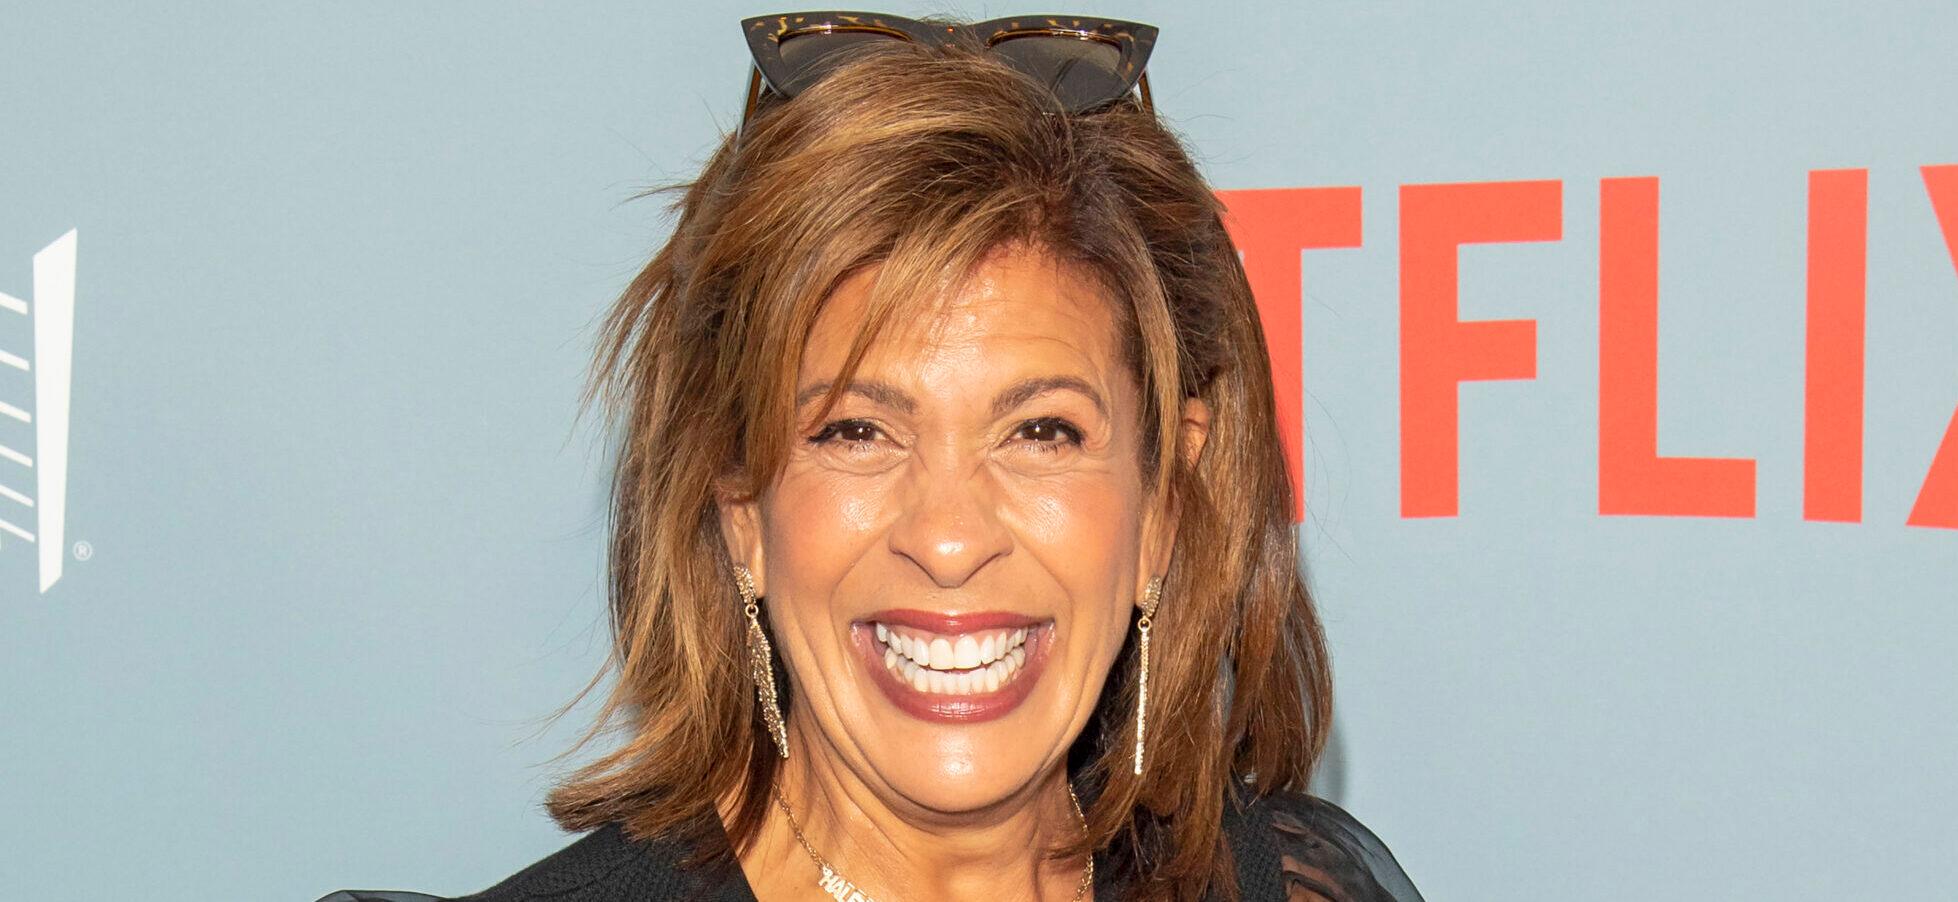 Hoda Kotb Shares Update About Daughter’s Recovery After Health Scare